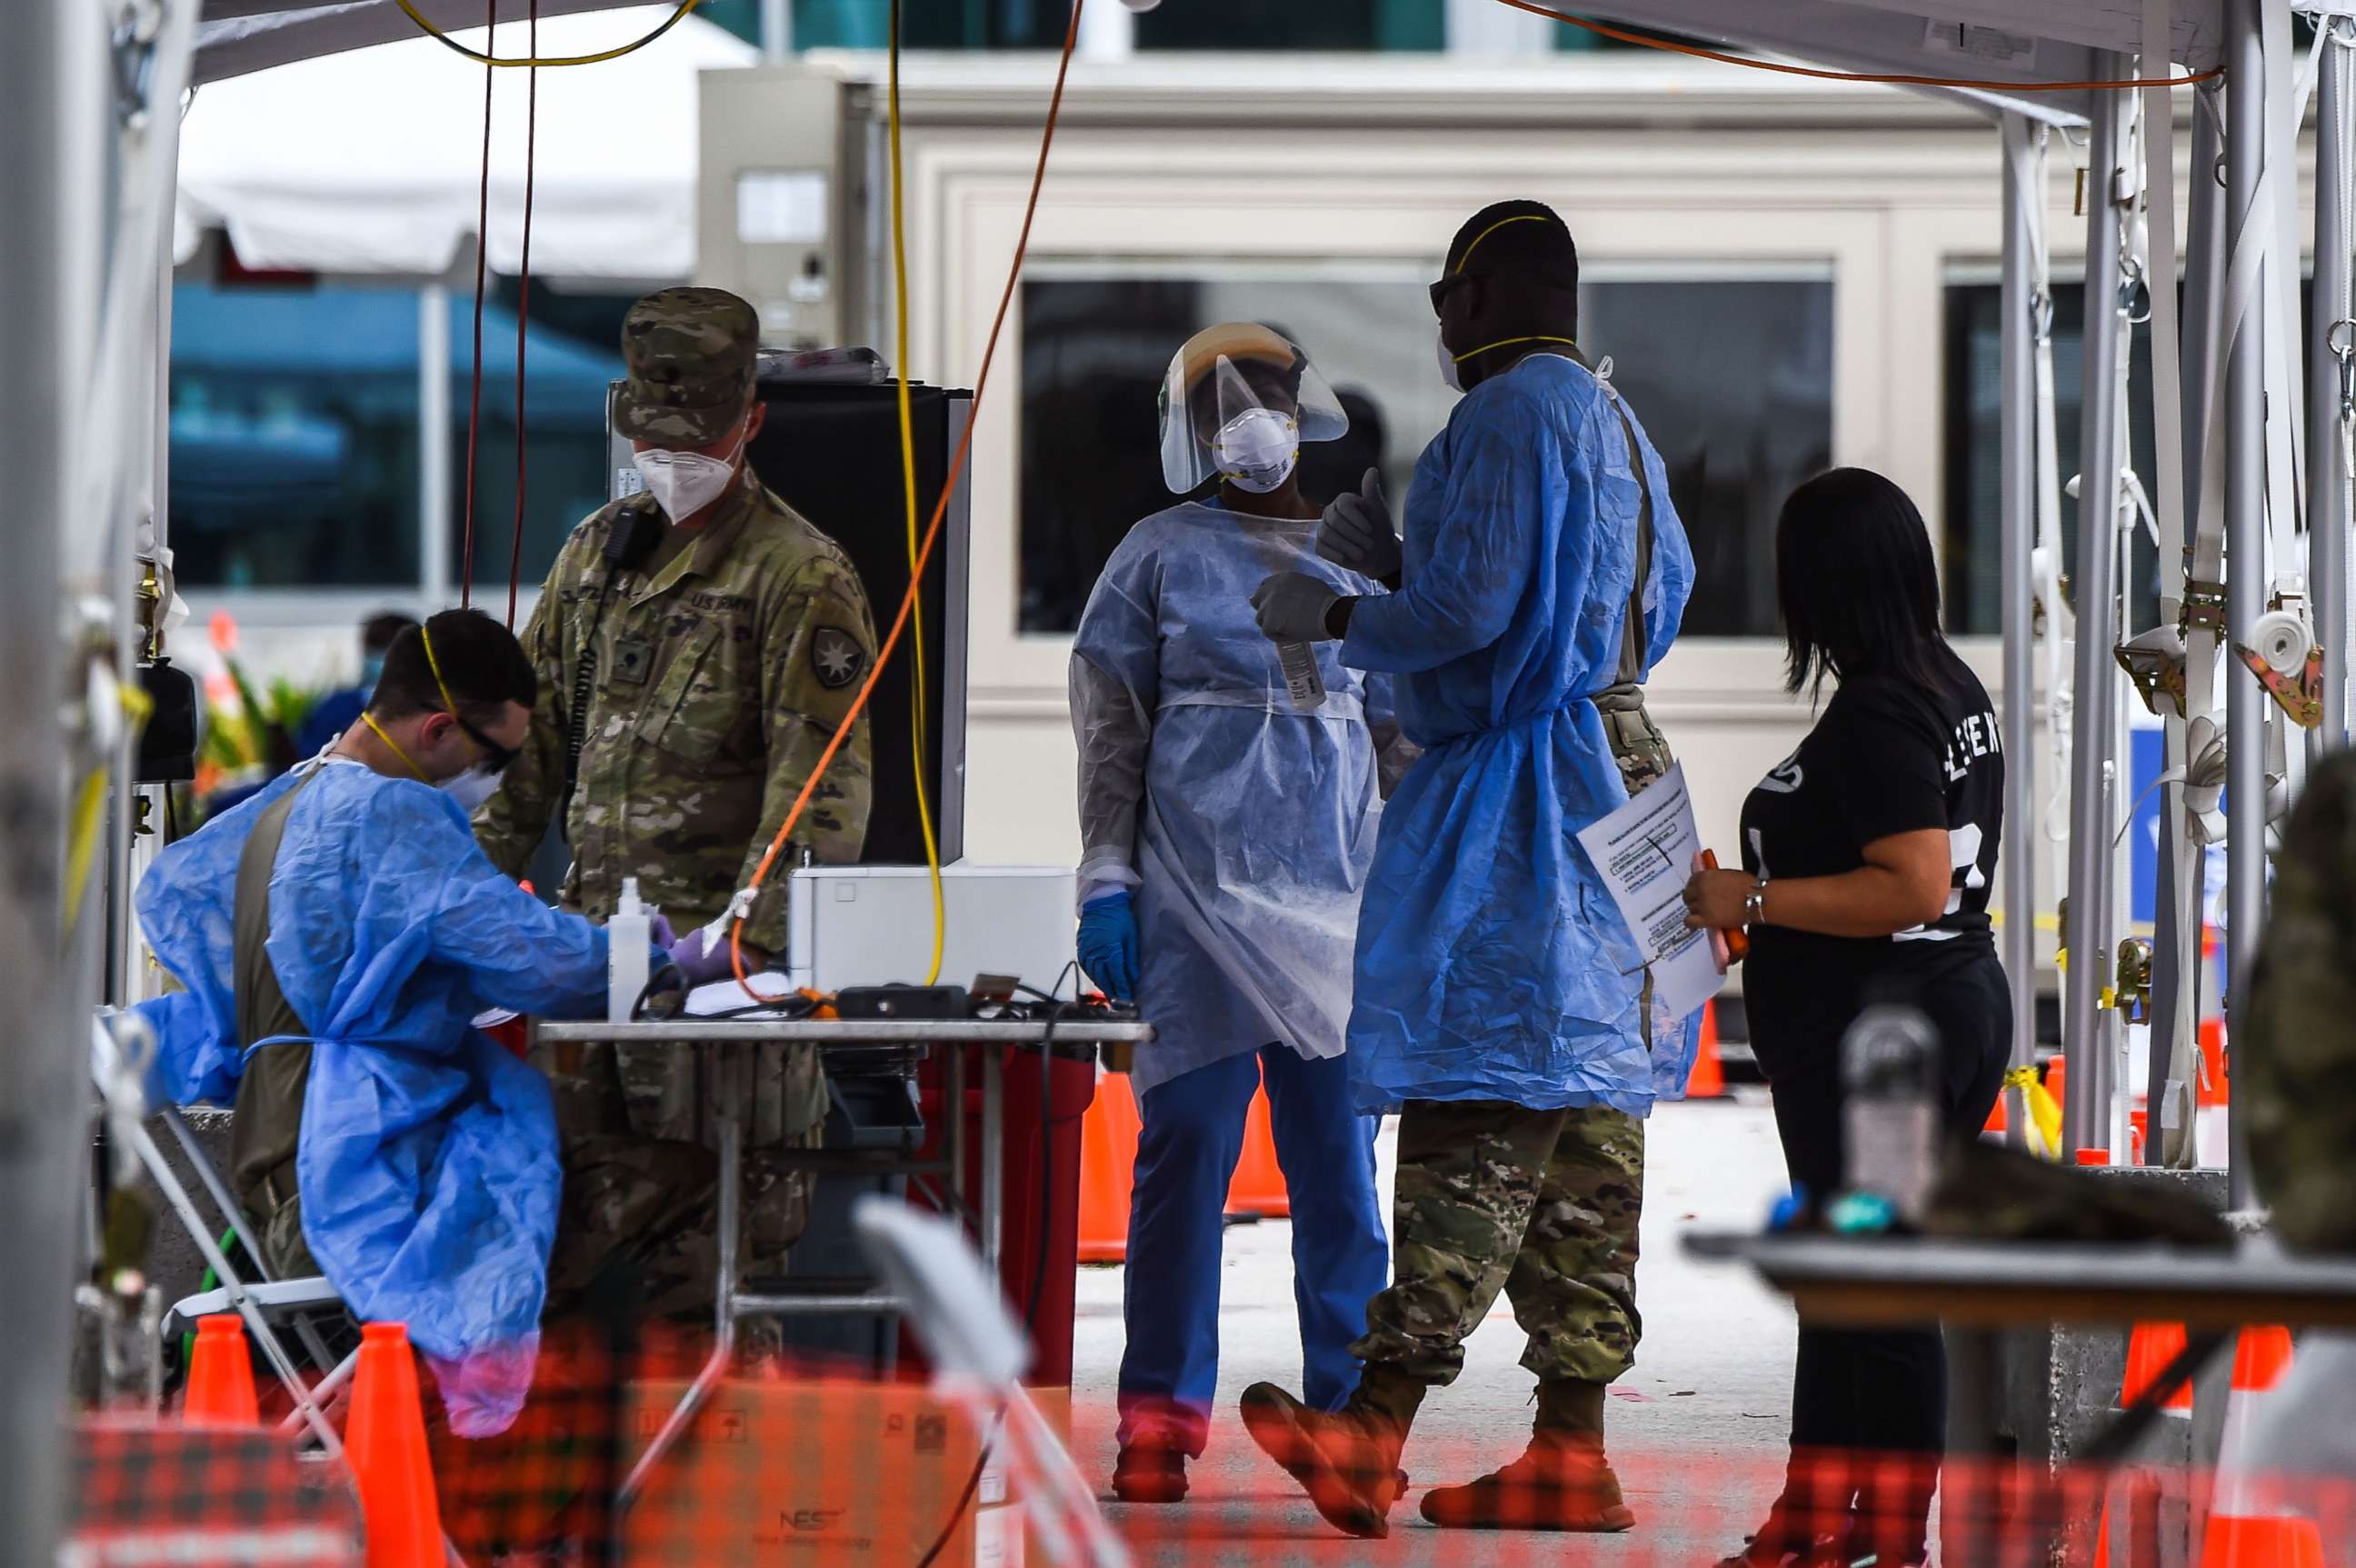 PHOTO: Medical personnel conduct coronavirus testing at a "walk-in" and "drive-through" site in Miami Beach, Fla., July 22, 2020.